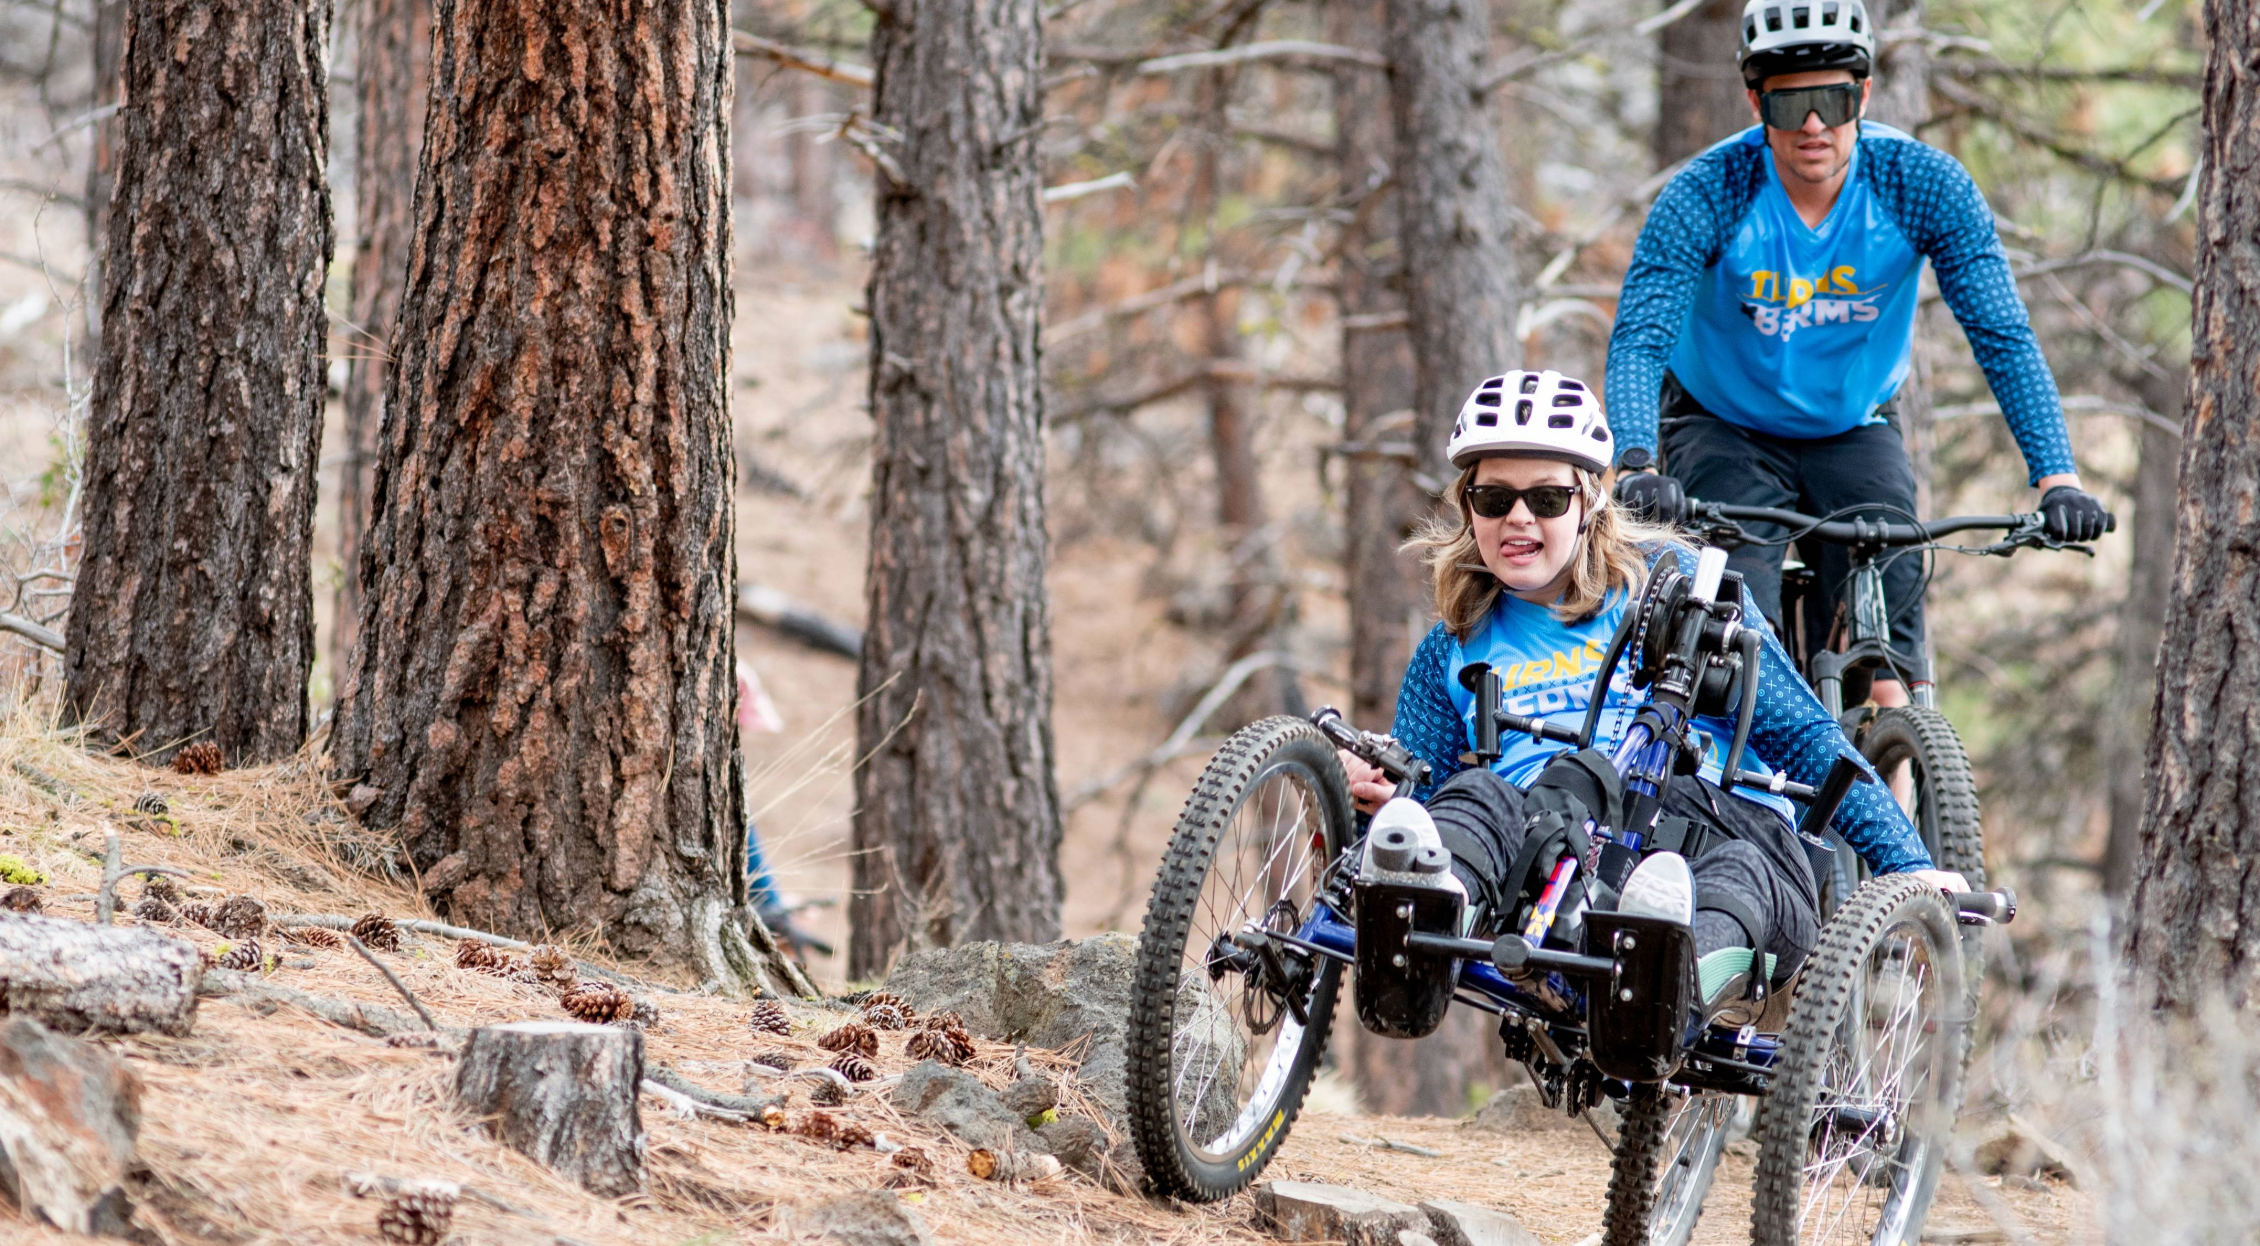 Female adaptive athlete in an aMTB hand-cycle powers through some technical terrien with an OAS volunteer on a standing bike following behind